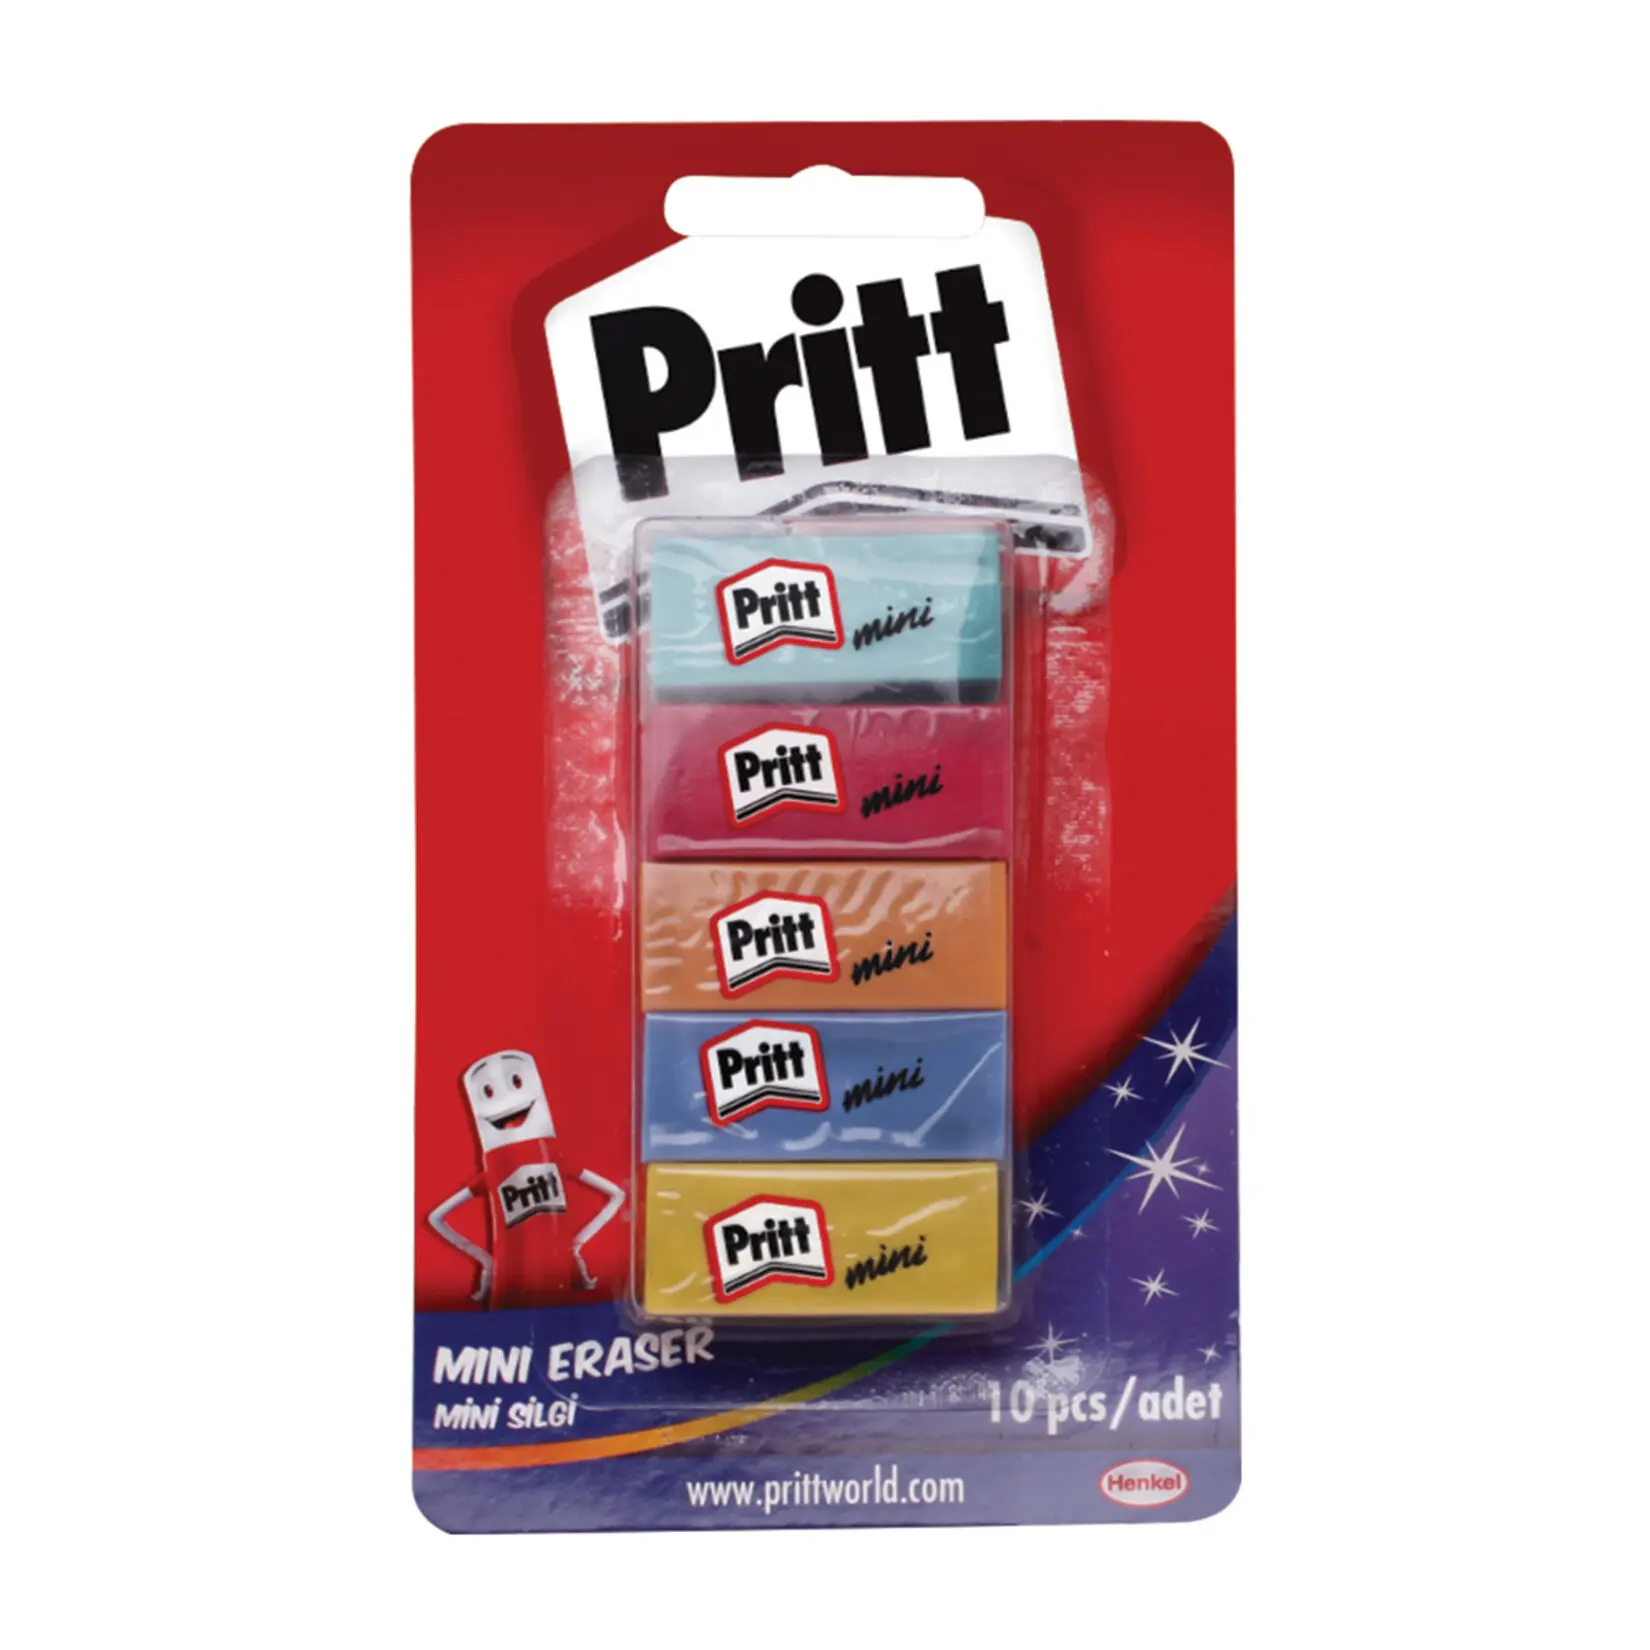 Pritt Mini Eraser 10'Lu Pirtt Mini Eraser, home And Office Use In Uygundur.5 10 Grain On Paper Will Not Leave Trace Does Not Wear Out.